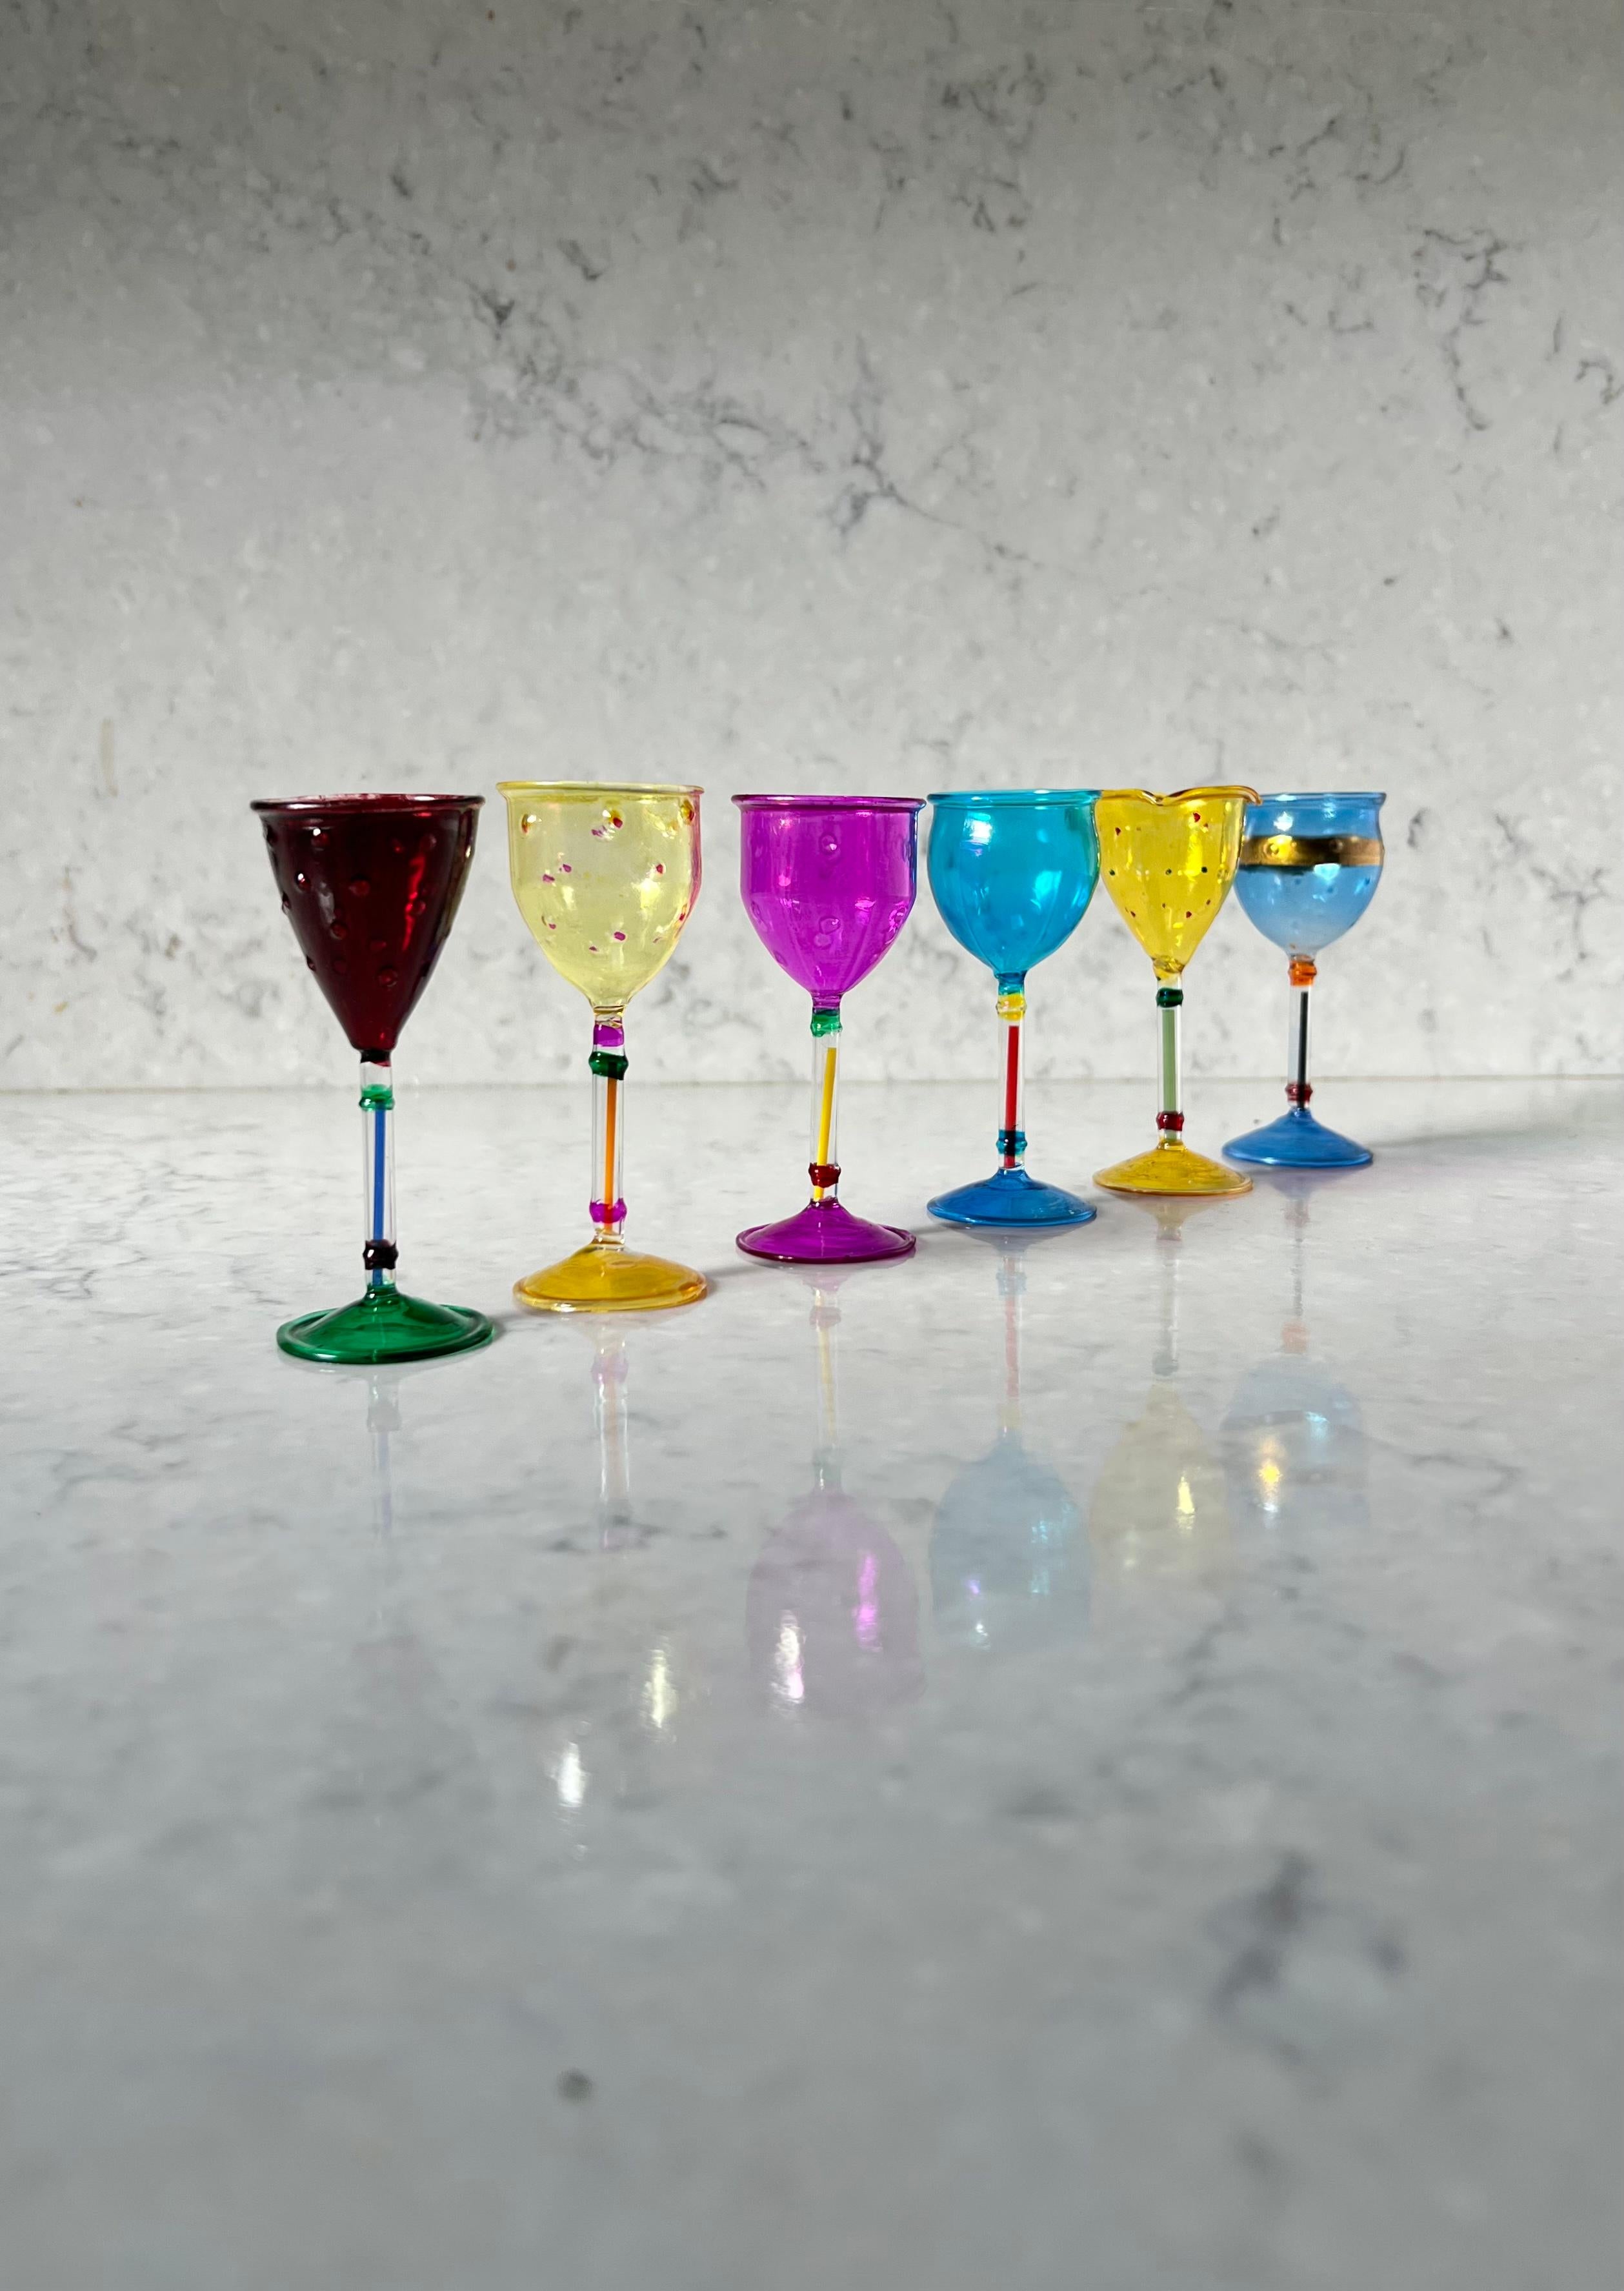 A set of six vintage Venetian cordial glasses by Antonio Salviati for Venezia, 20th century. Laid in ivory silk within a midnight blue velvet box with tooth-clasp opening. Glasses are hand-painted in colorful tones of merlot, mustard, magenta, and